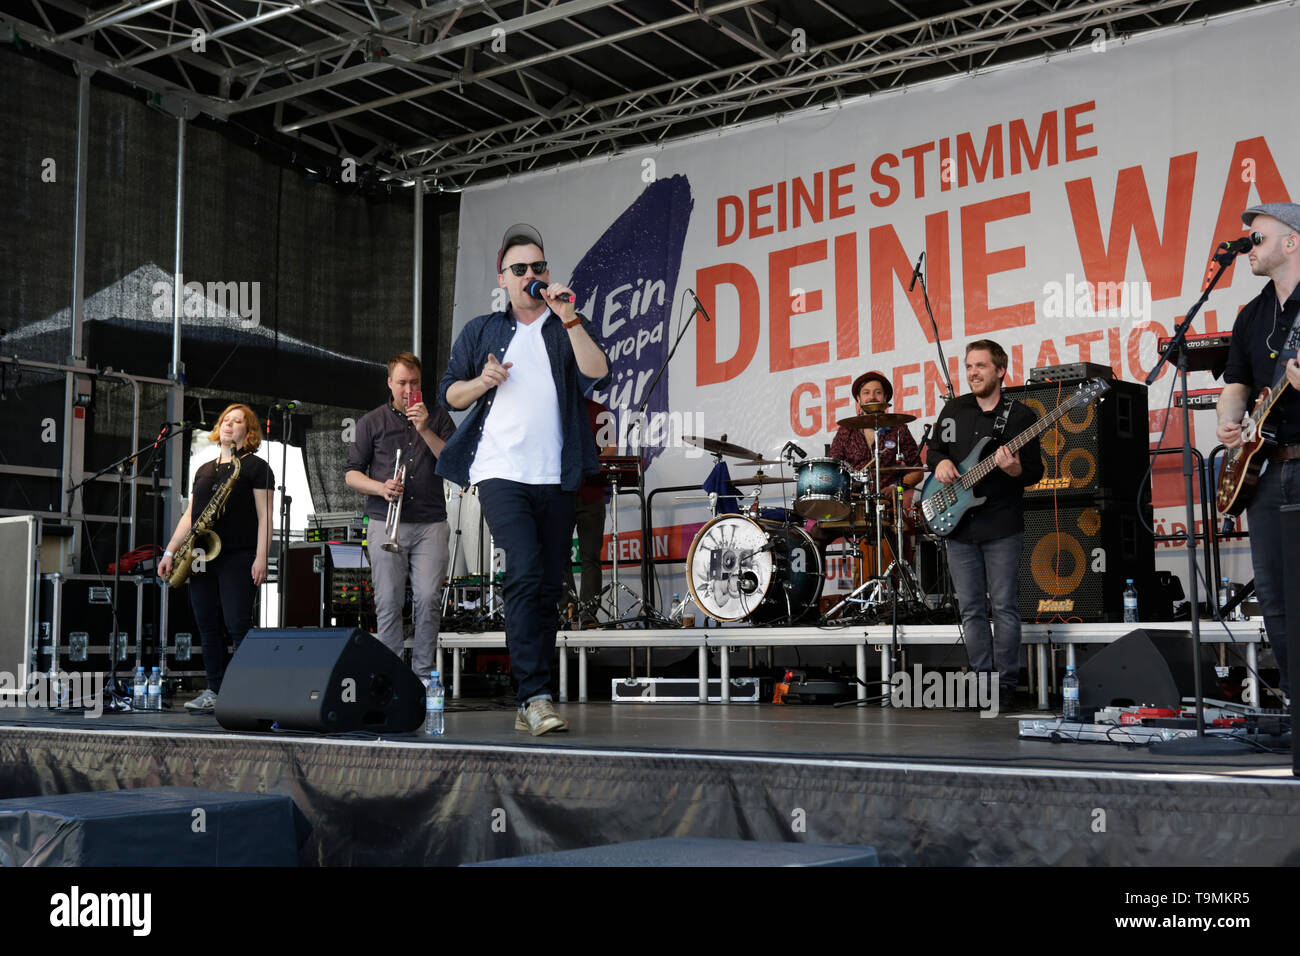 Frankfurt, Germany. 19th May 2019. The Berlin Boom Orchestra performs at the rally. More than 10,000 people marched through Frankfurt, under the Motto 'One Europe for all - Your voice against nationalism’, one week ahead of the 2019 European Election. They called for a democratic Europe and to set a sign against the emerging nationalism in Europe. The march was part of a European wide protest. Stock Photo